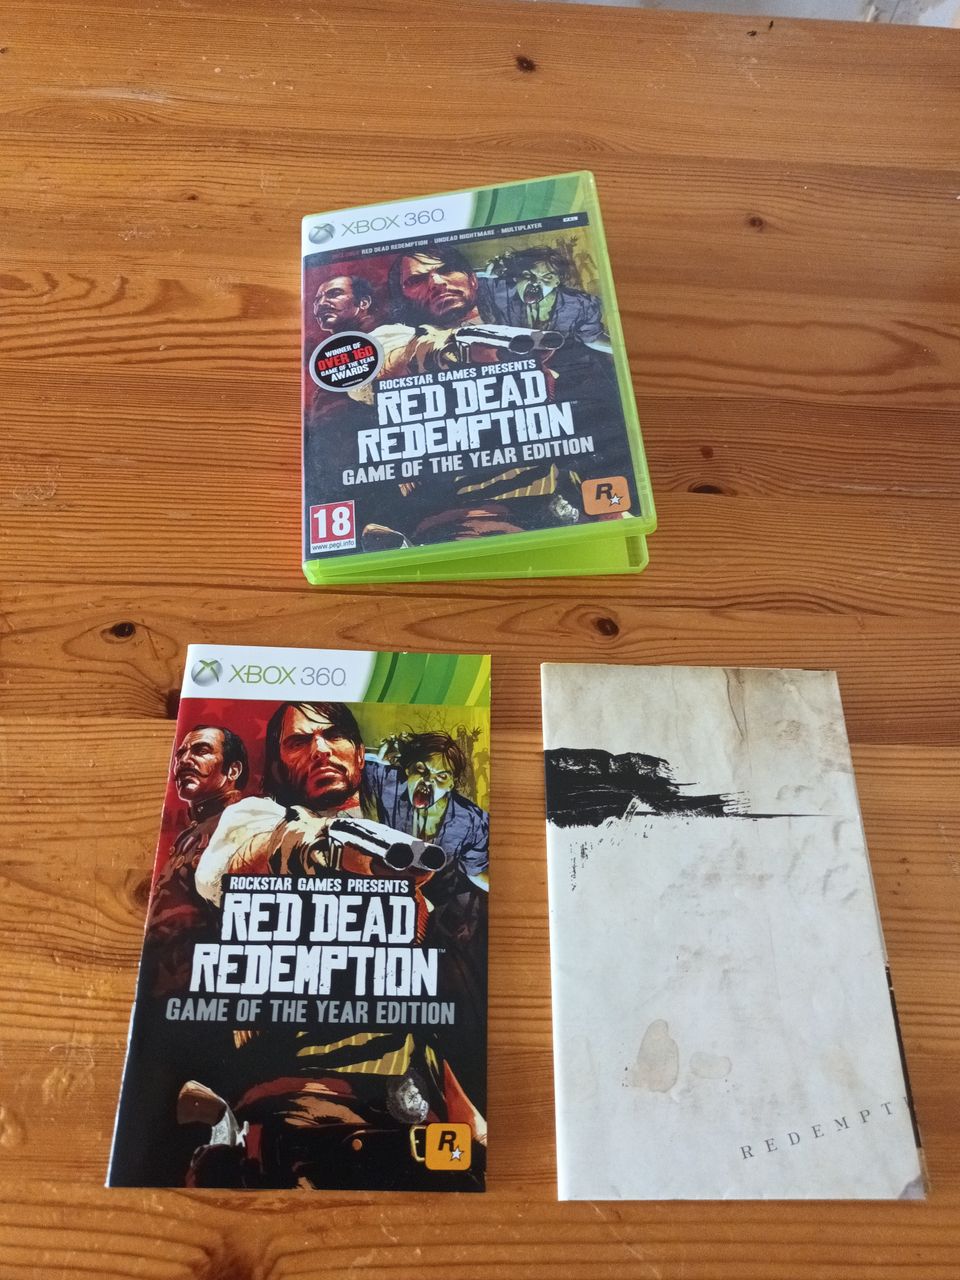 Rdr game of year edition